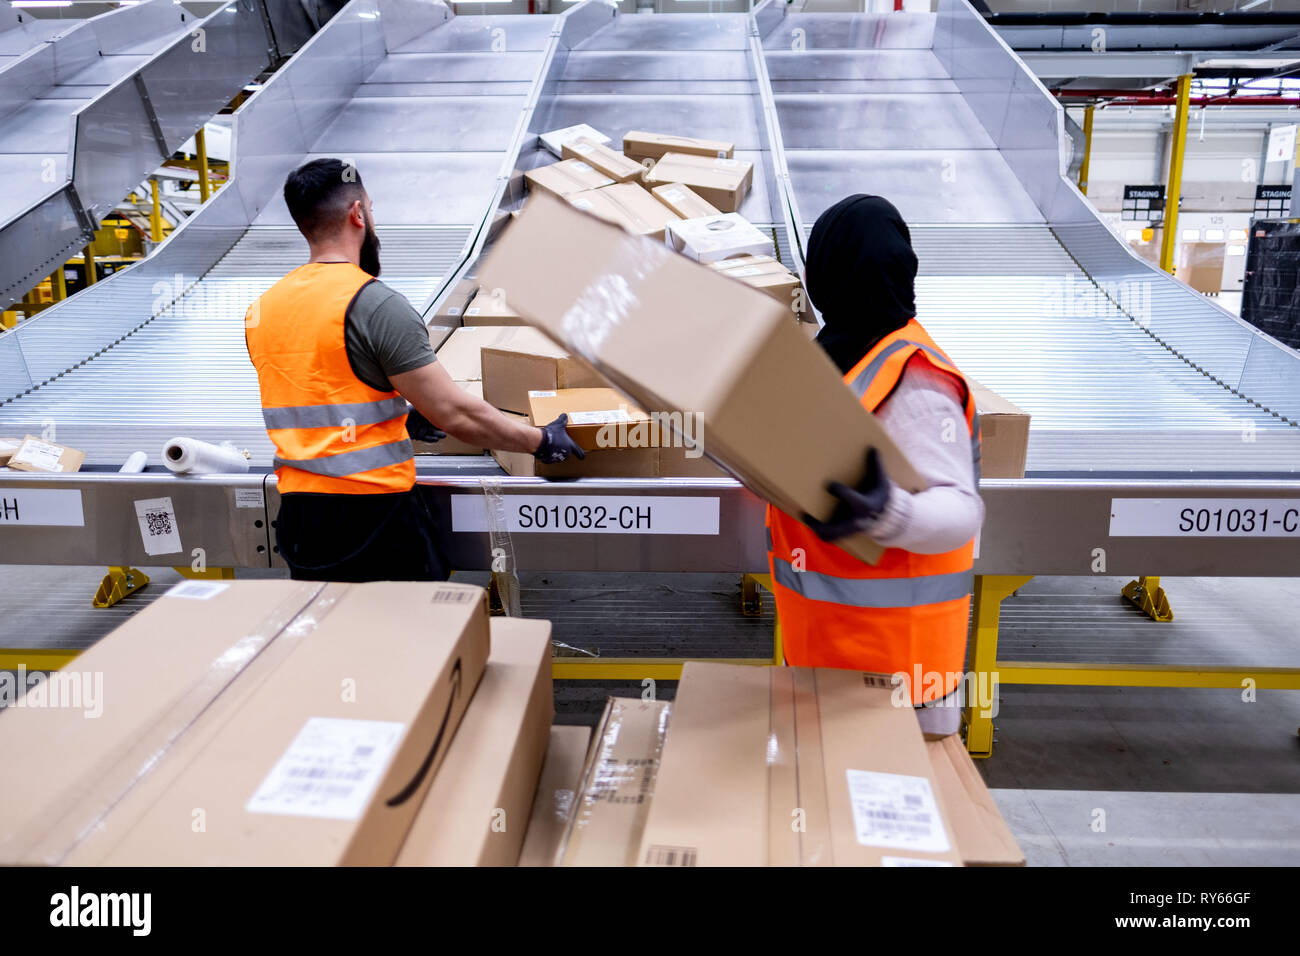 12 March 2019, Lower Saxony, Garbsen: Employees of the parcel shipper Amazon sort parcels at the sorting centre in Garbsen. Amazon sorts the parcels in Garbsen by delivery area and then forwards them to parcel shippers. Amazon already operates a logistics centre in Winsen in Lower Saxony. 700 jobs are to be created in Garbsen near Hanover. Photo: Peter Steffen/dpa Stock Photo